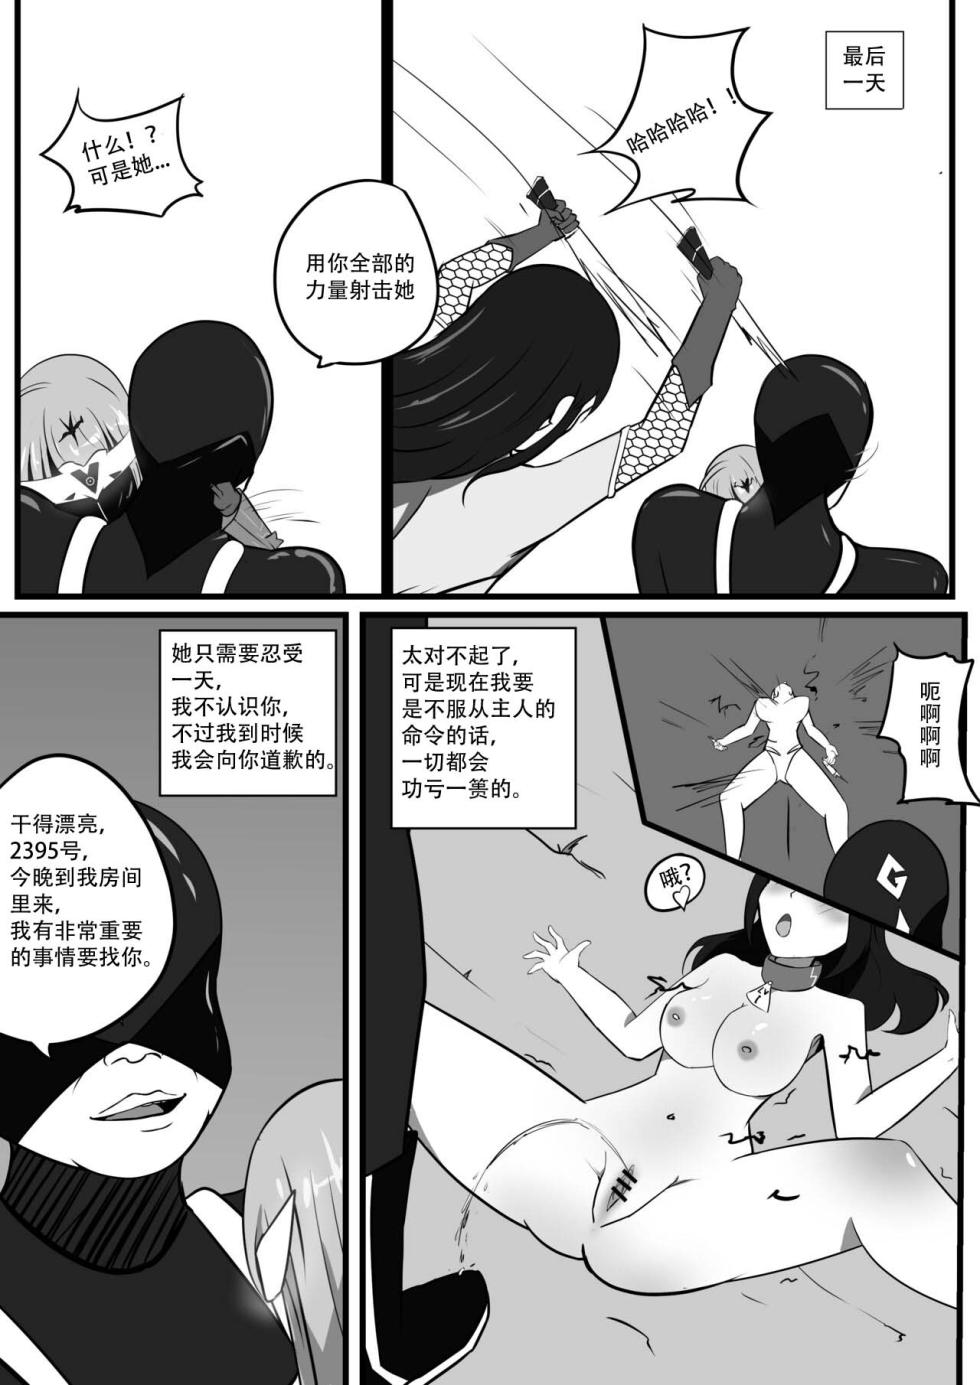 [Aynes] The Degradation of Angels [心海汉化组] - Page 21